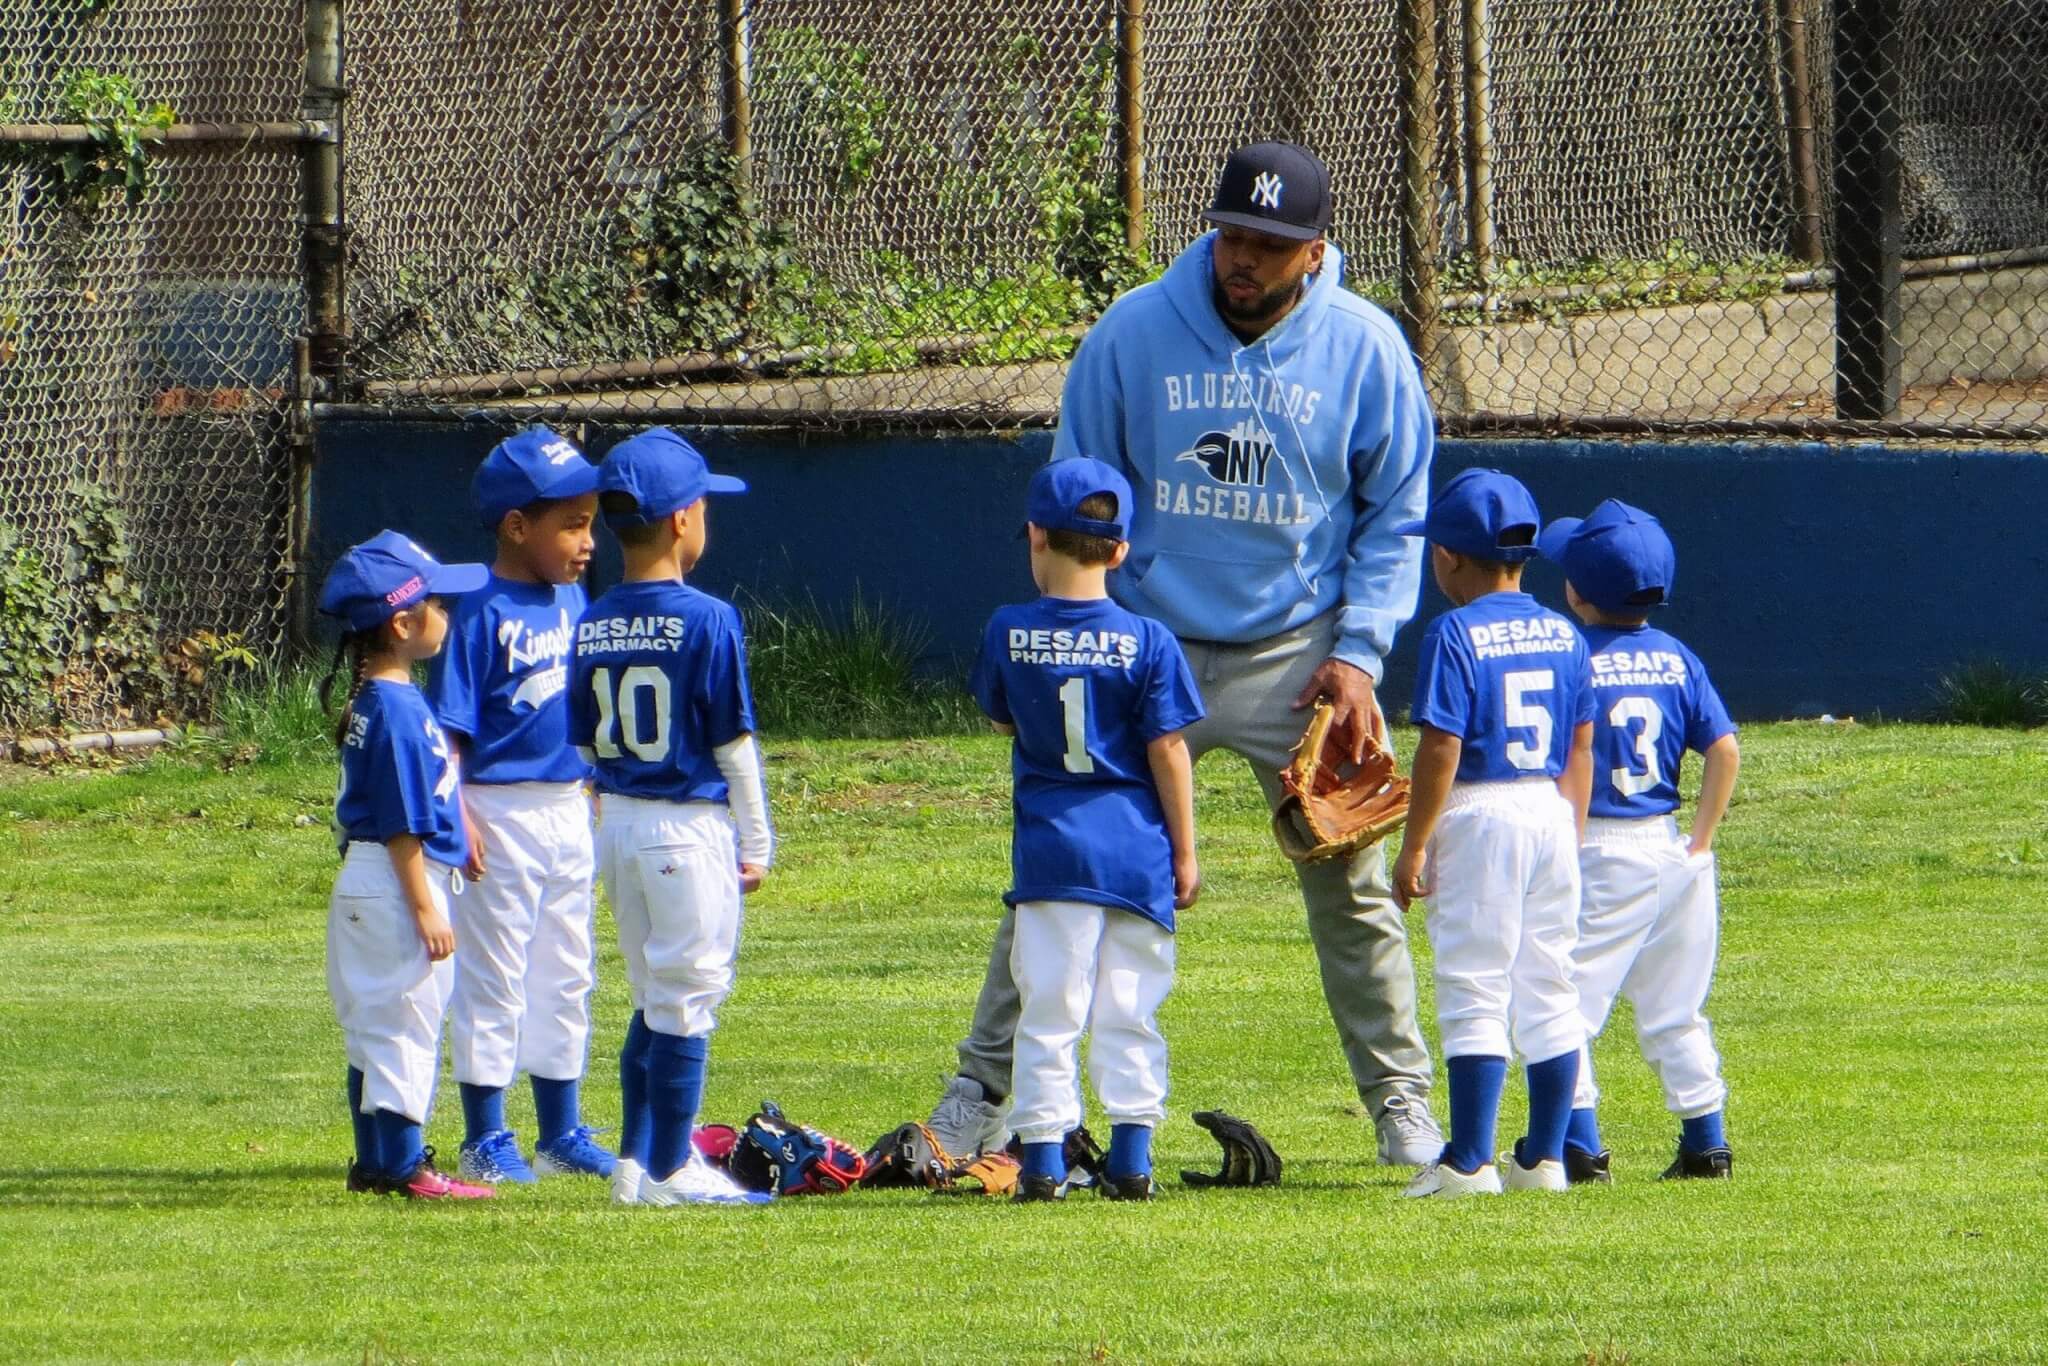 Children playing little league baseball with their coach